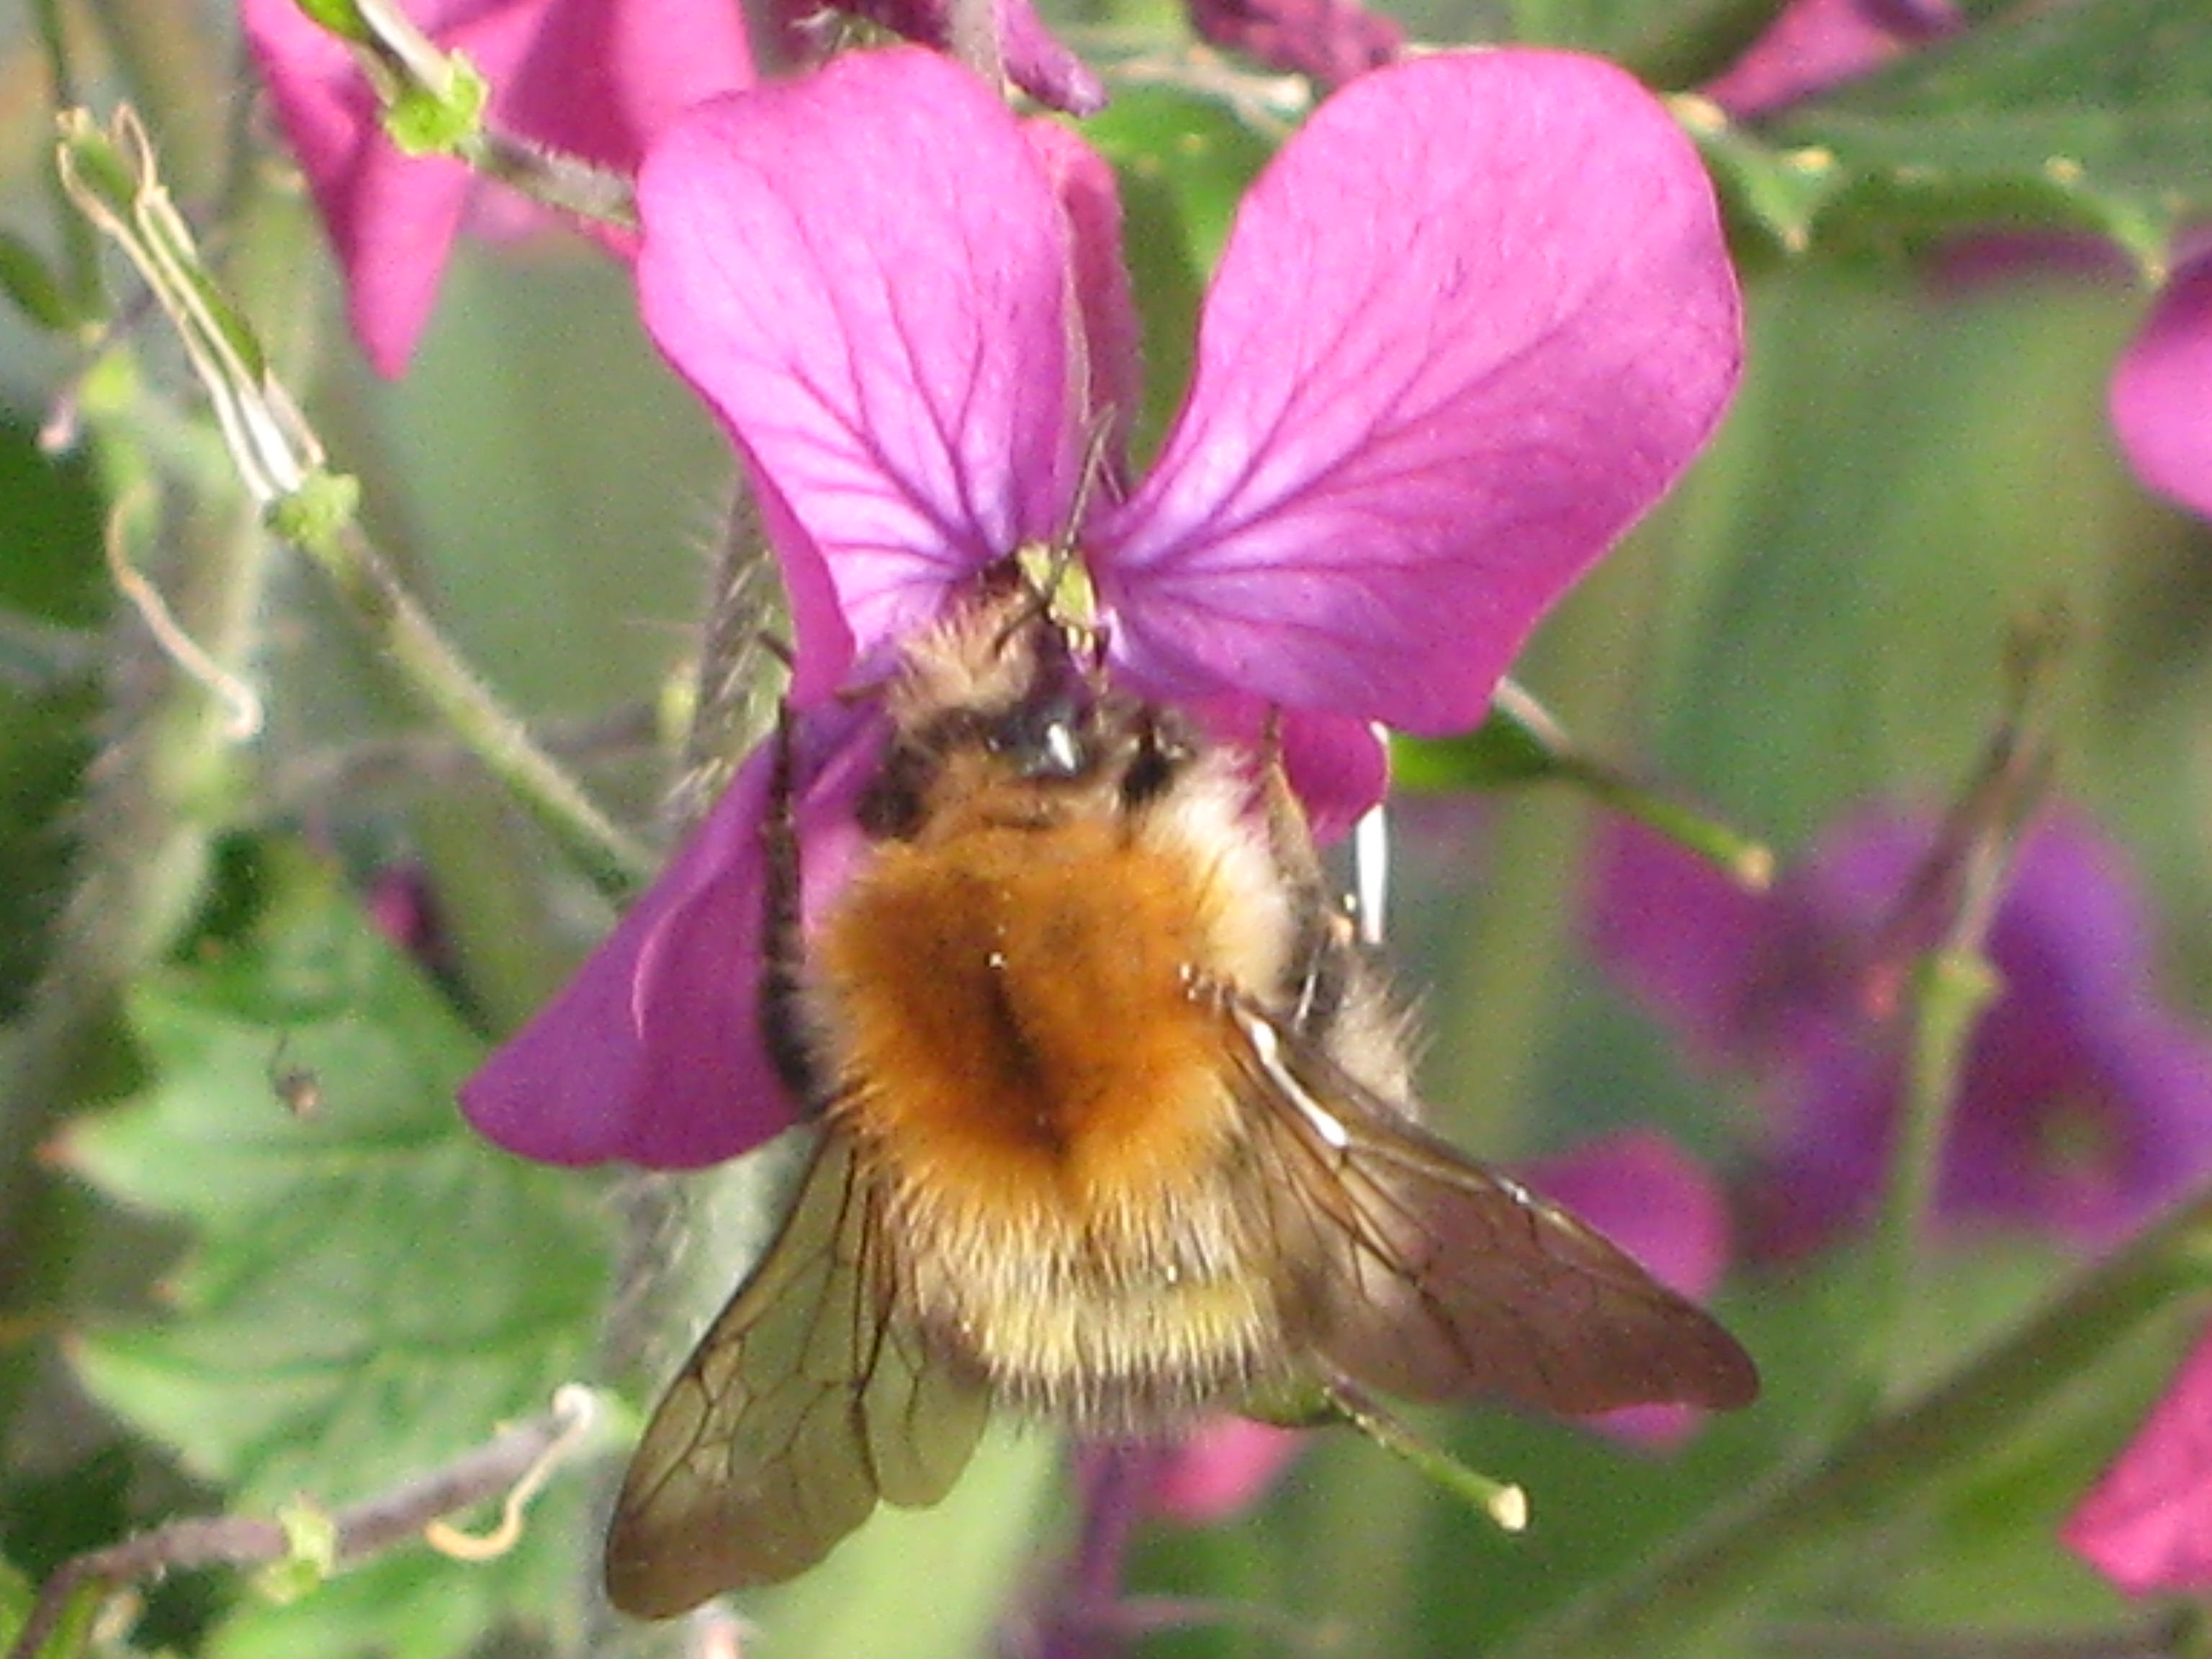 Bee on Lunaria flower at Bealtaine Cottage